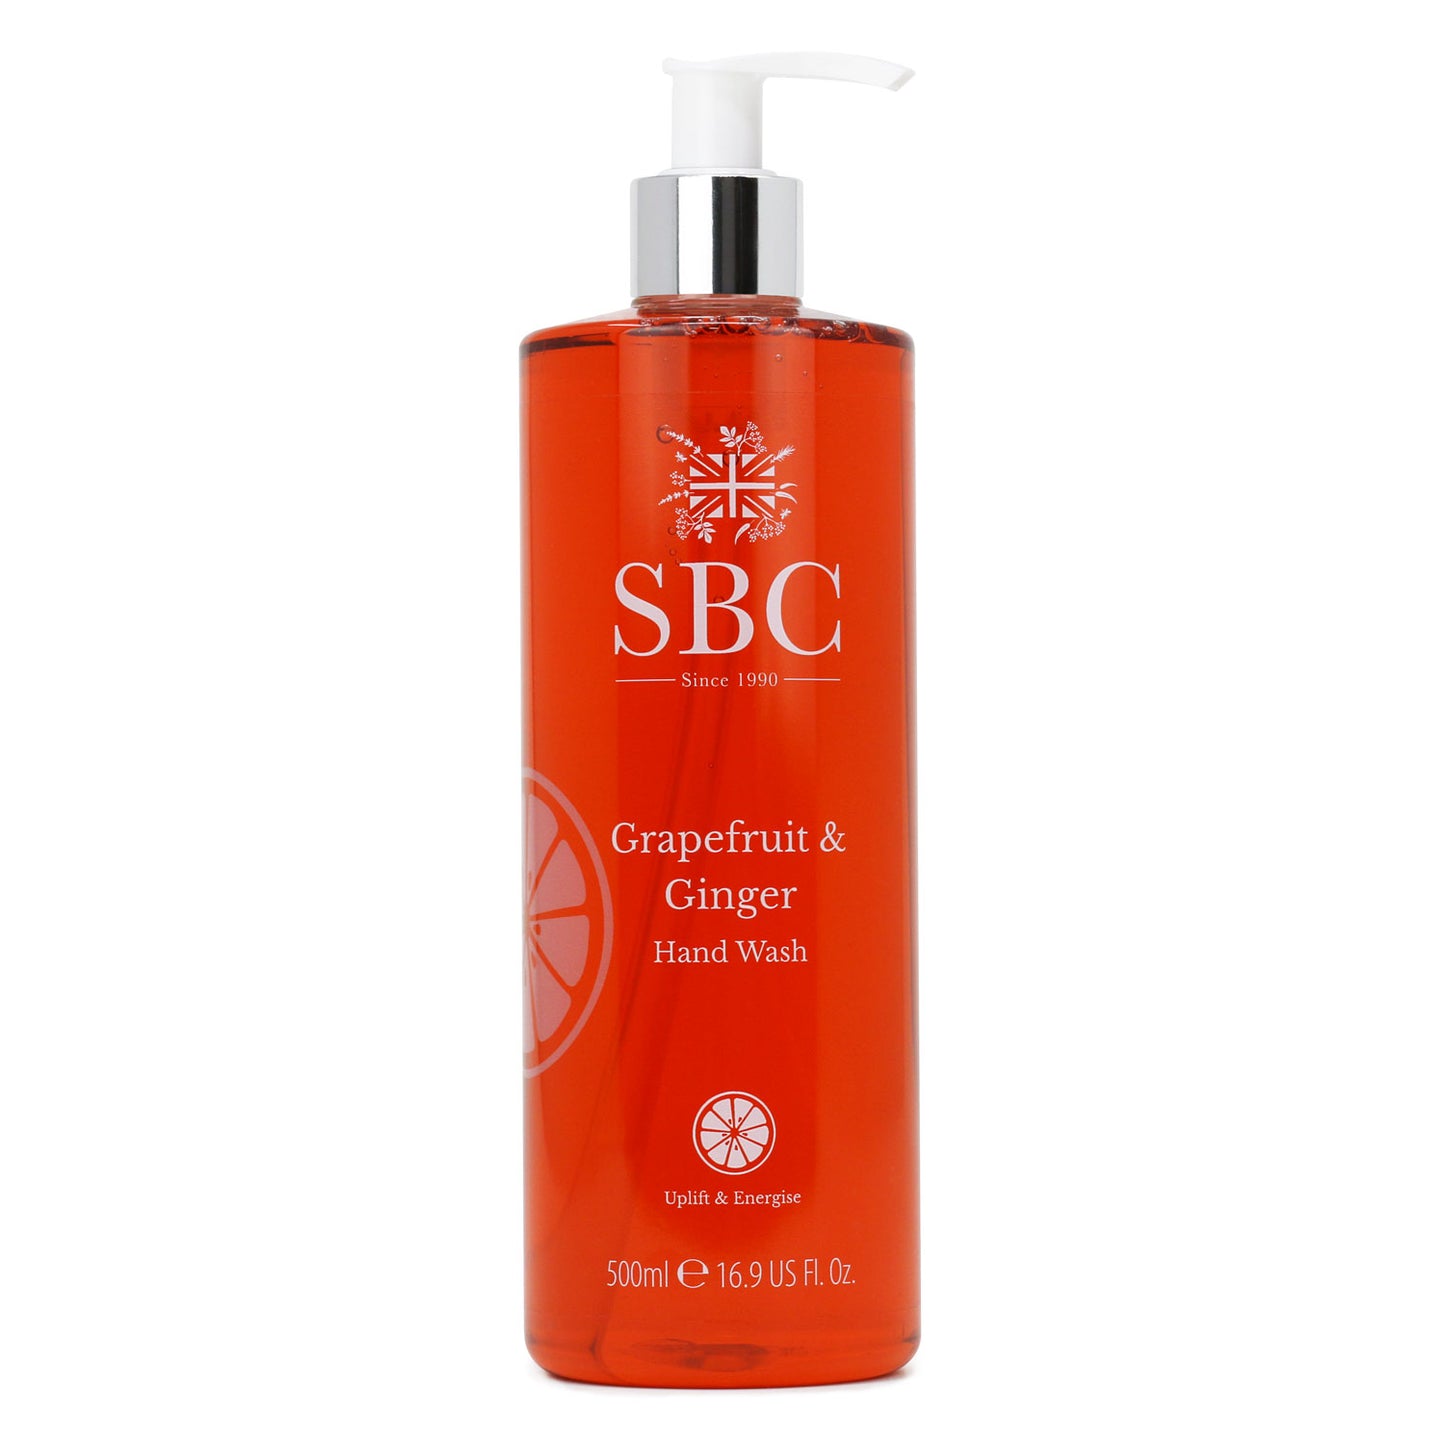 500ml Grapefruit & Ginger Hand Wash on a white background 